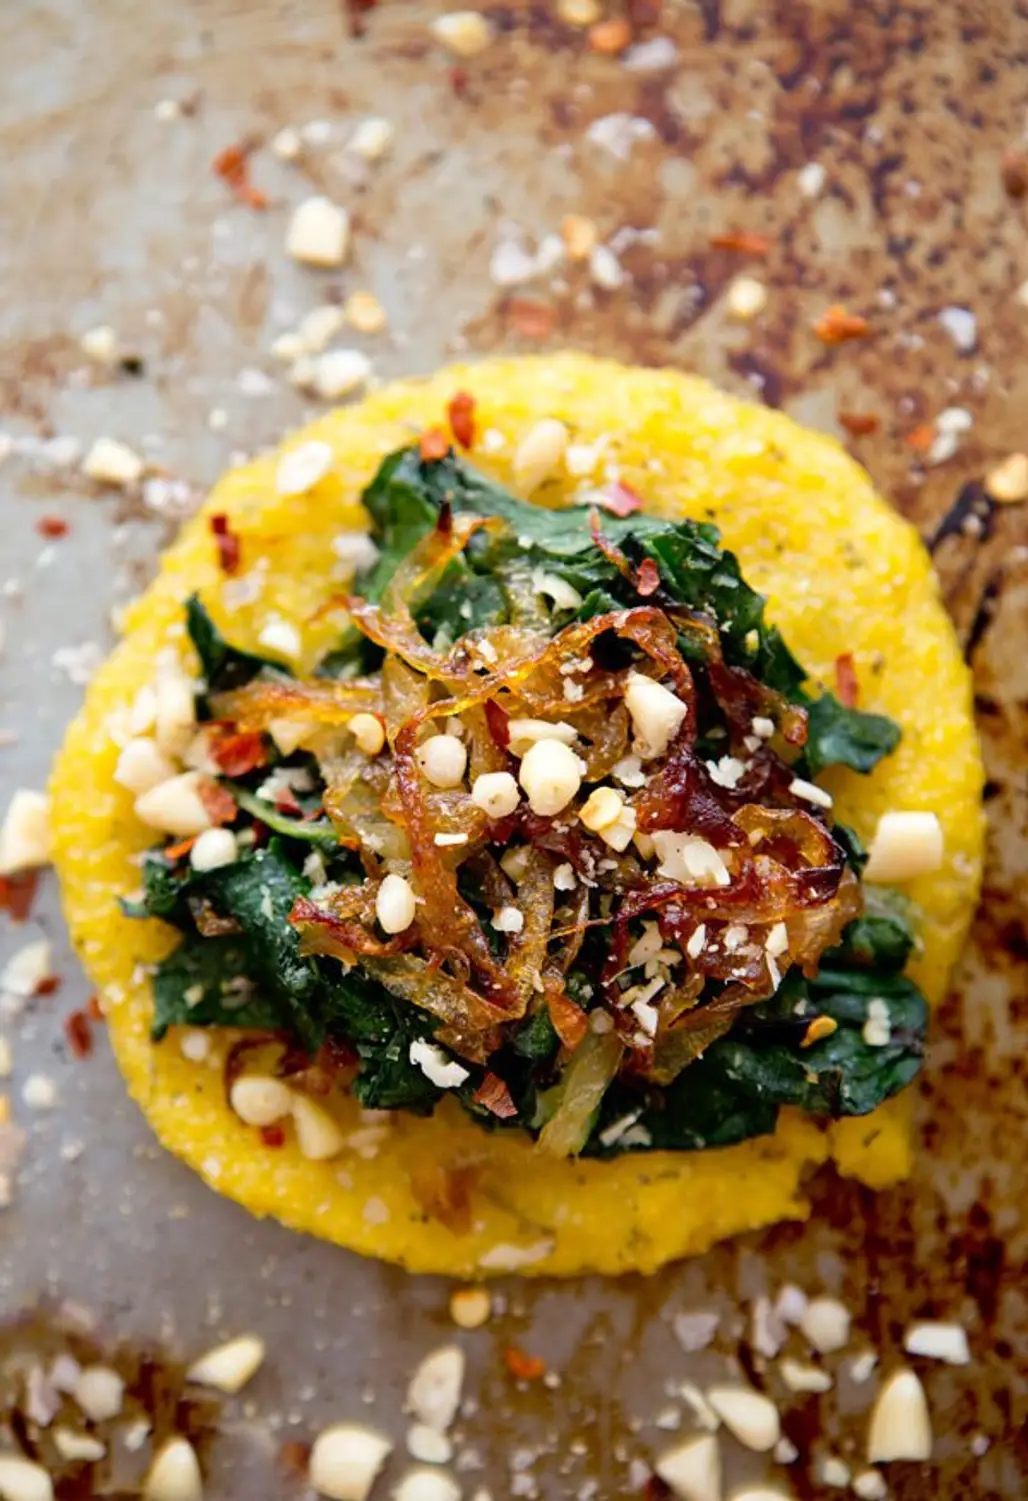 Polenta Has a Pleasing Flavor and is Easy to Make